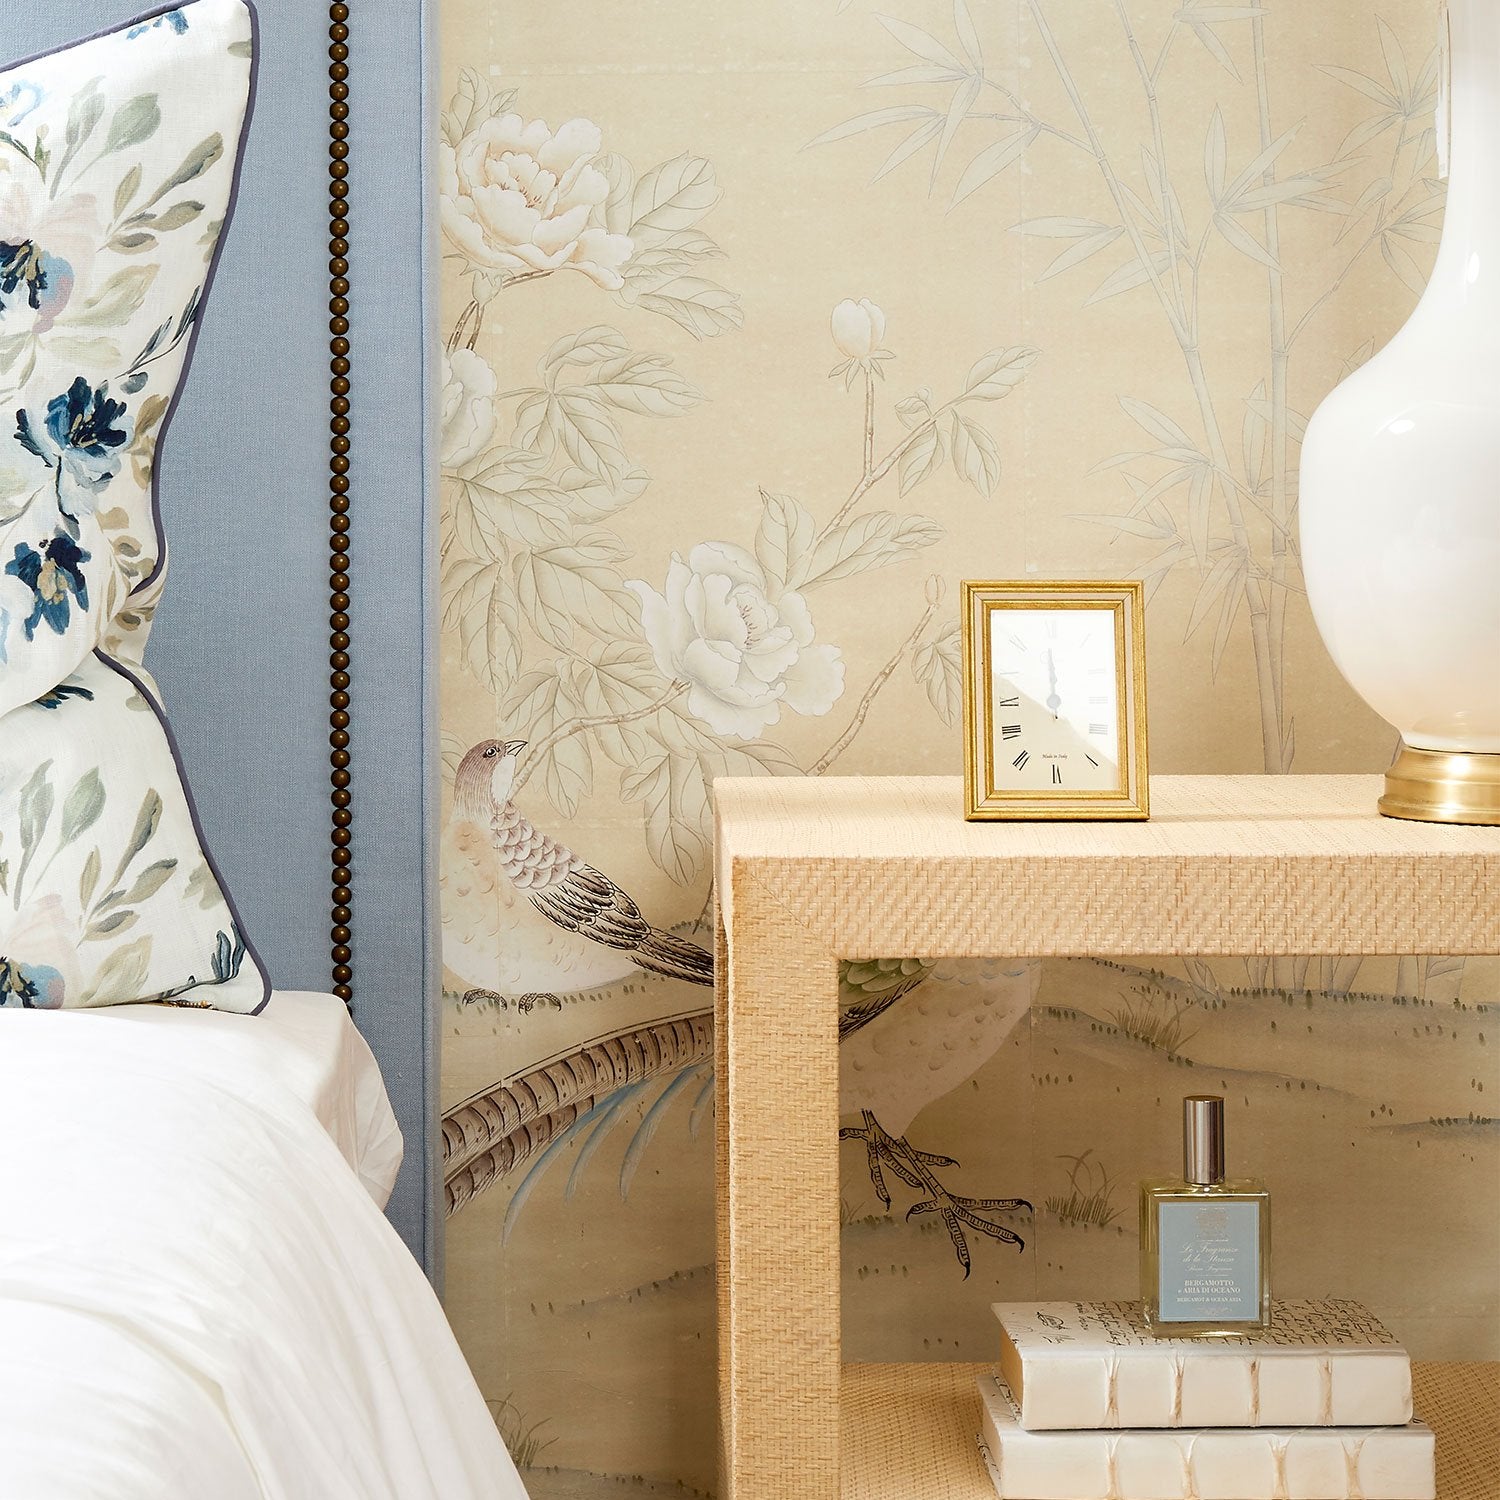 Vincennes in Cream Chinoiserie Wallpaper Mural on Bedroom Wall